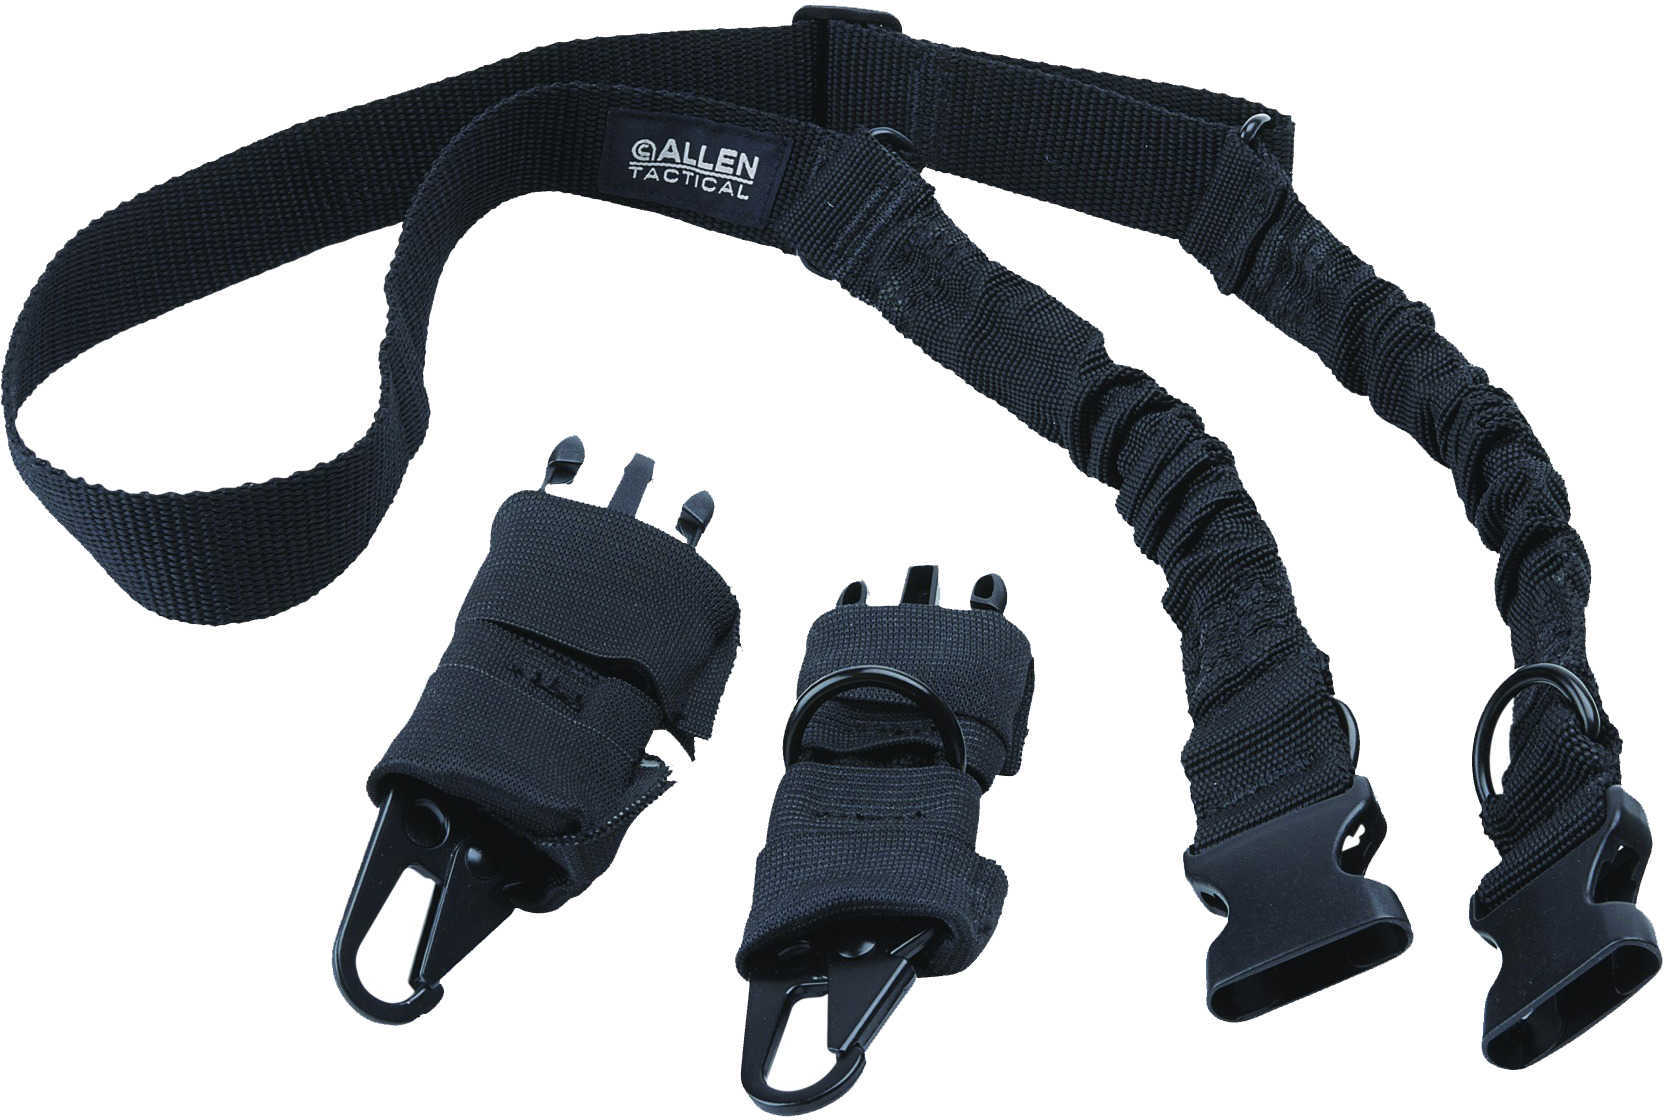 Allen Cases Buckley Tactical Sling Black Finish ConvertibleSingle To Two Point Attachment 8911